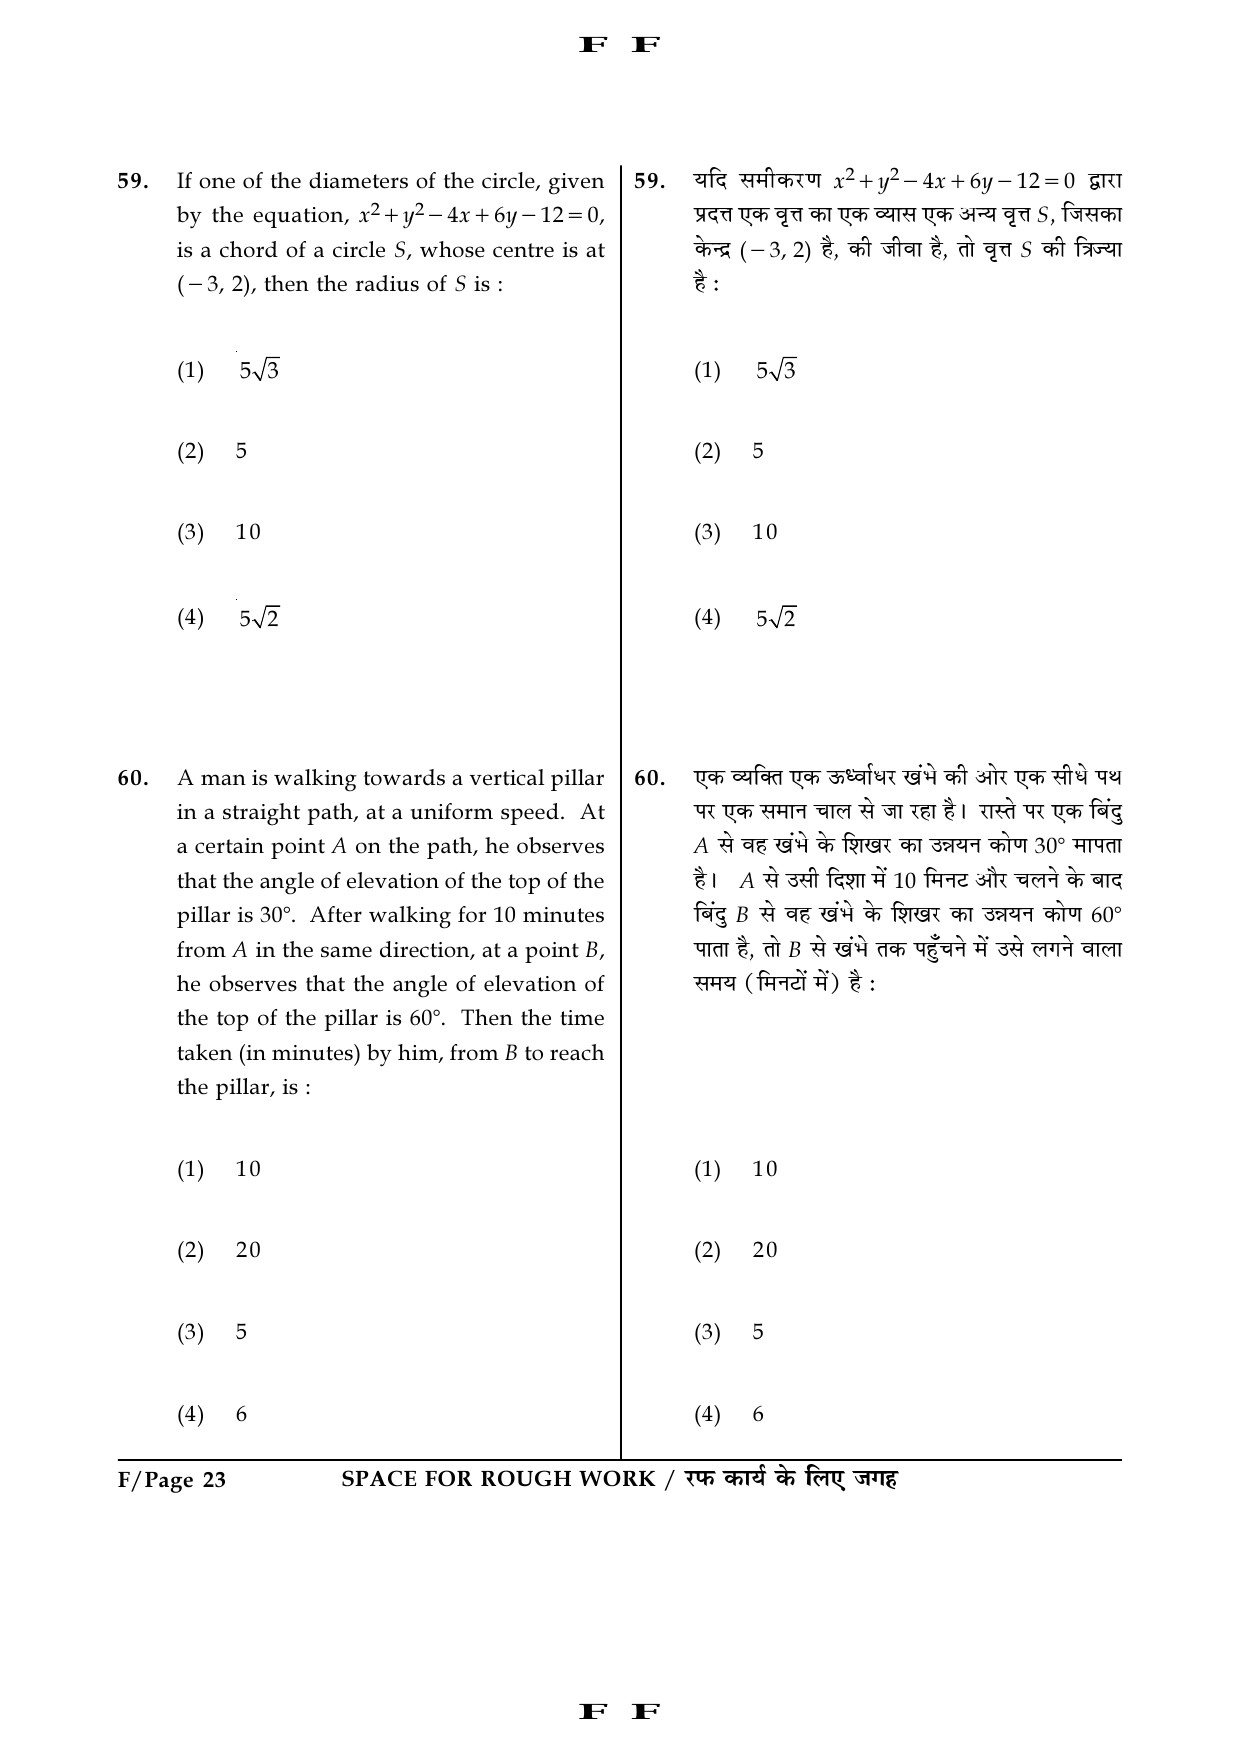 JEE Main Exam Question Paper 2016 Booklet F 23